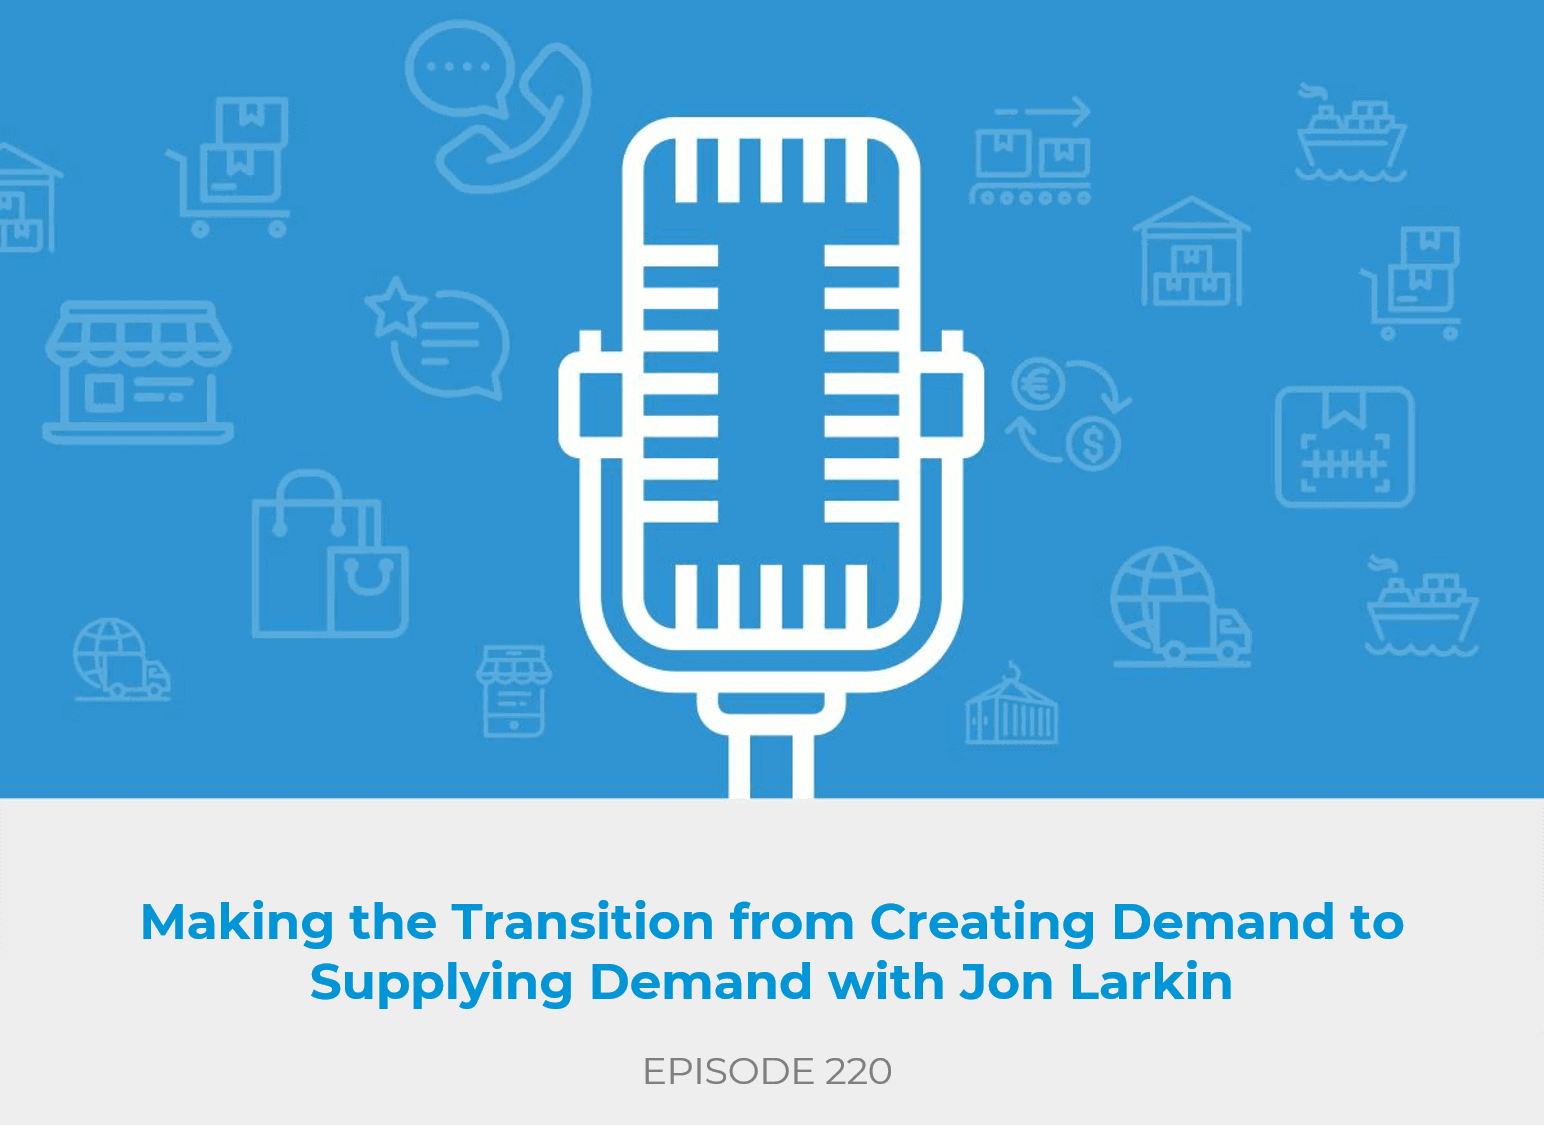 Making the Transition from Creating Demand to Supplying Demand with Jon Larkin